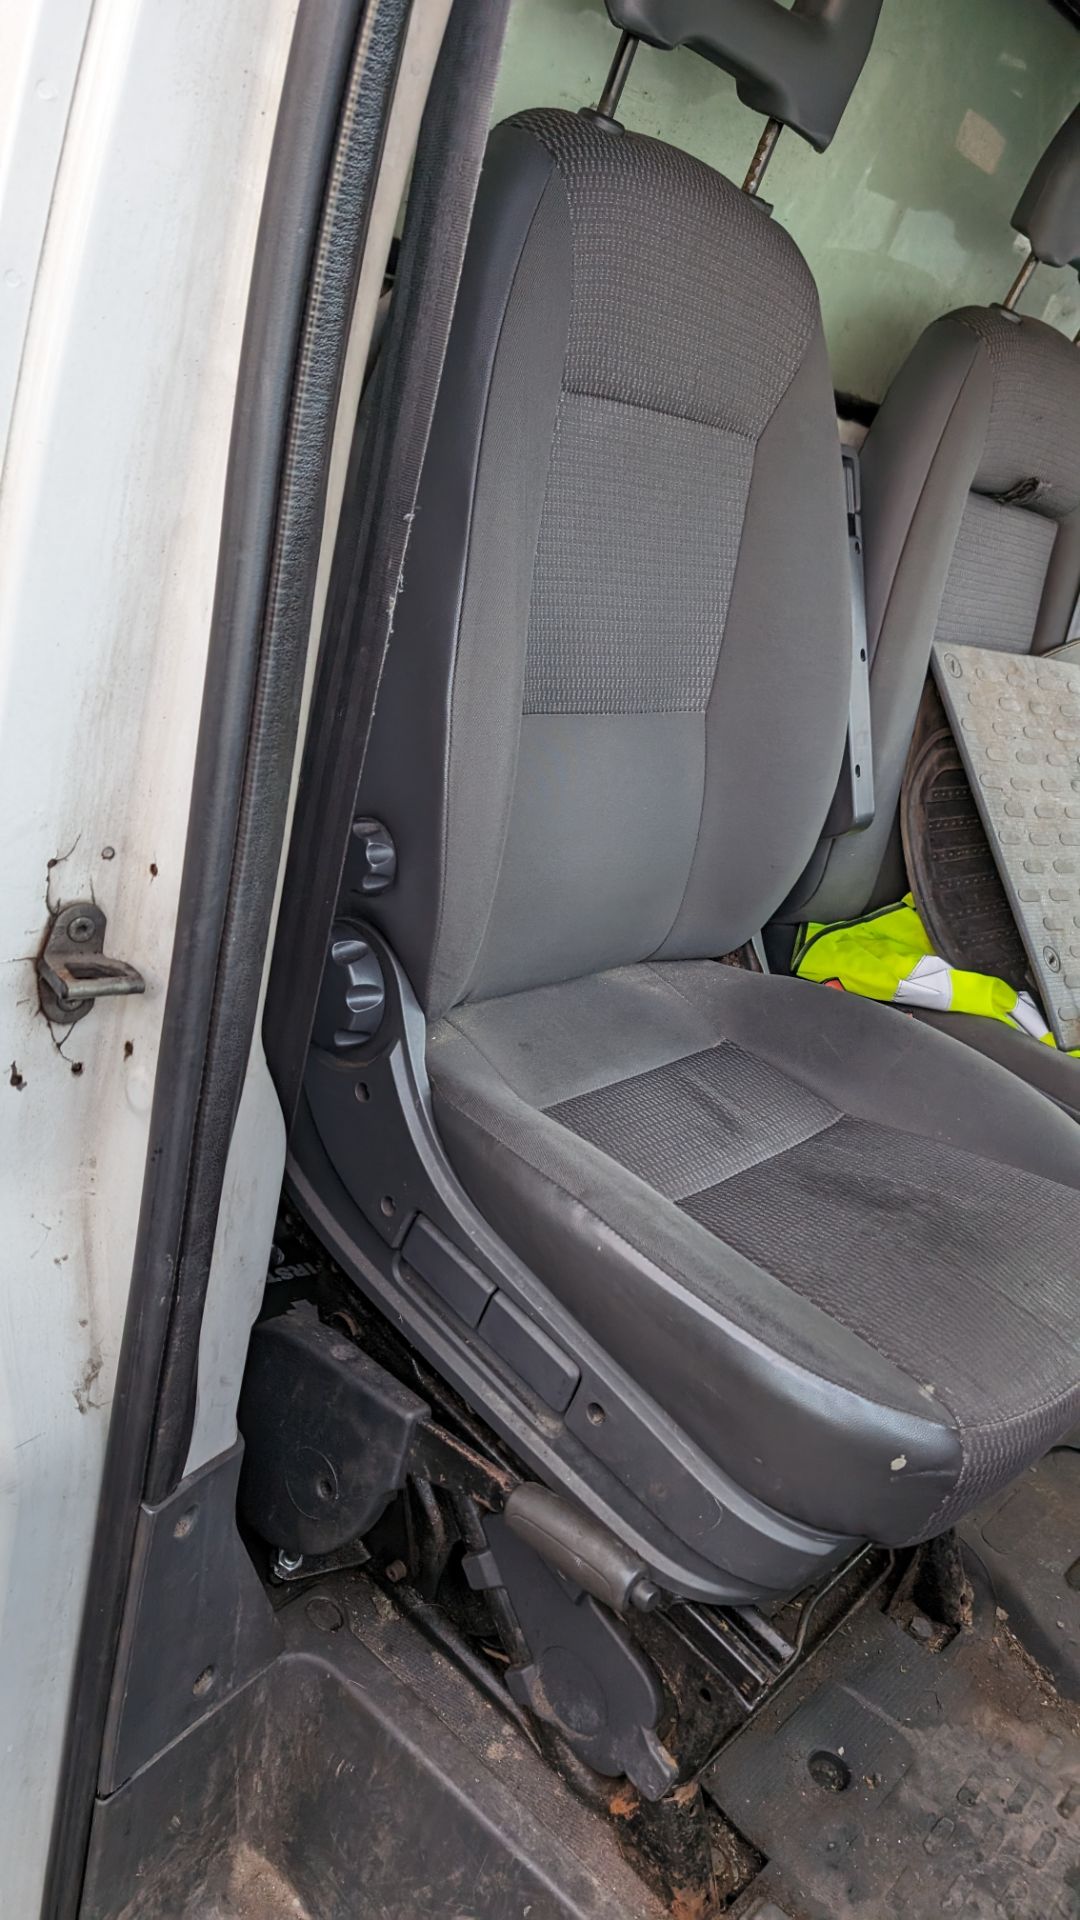 2011 Citroen Relay Luton van with tail lift - Image 17 of 17